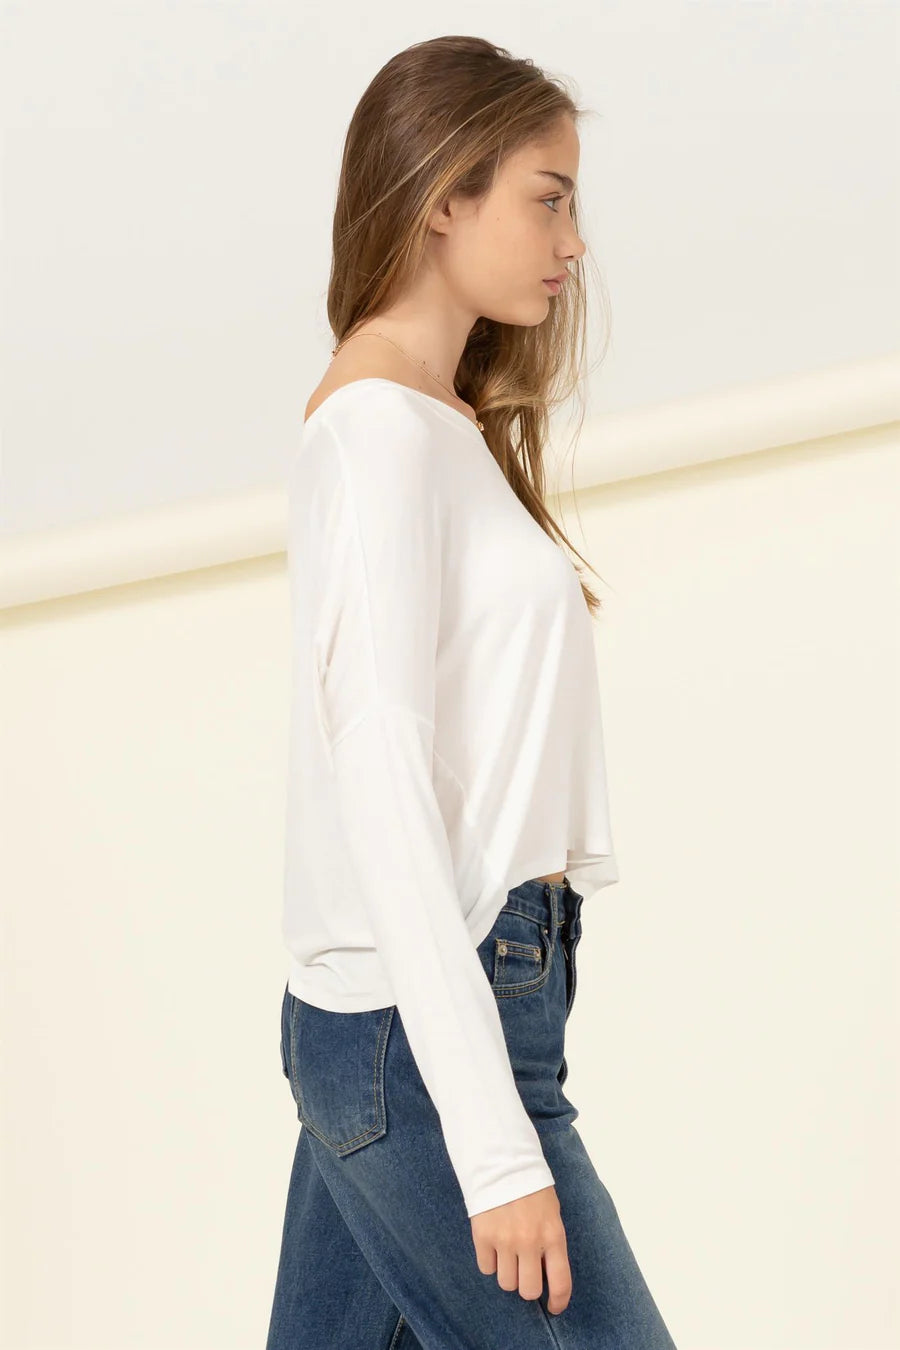 The model is wearing an Off White Love Me Right V Neck Loose Fit Top and jeans by HYFVE.